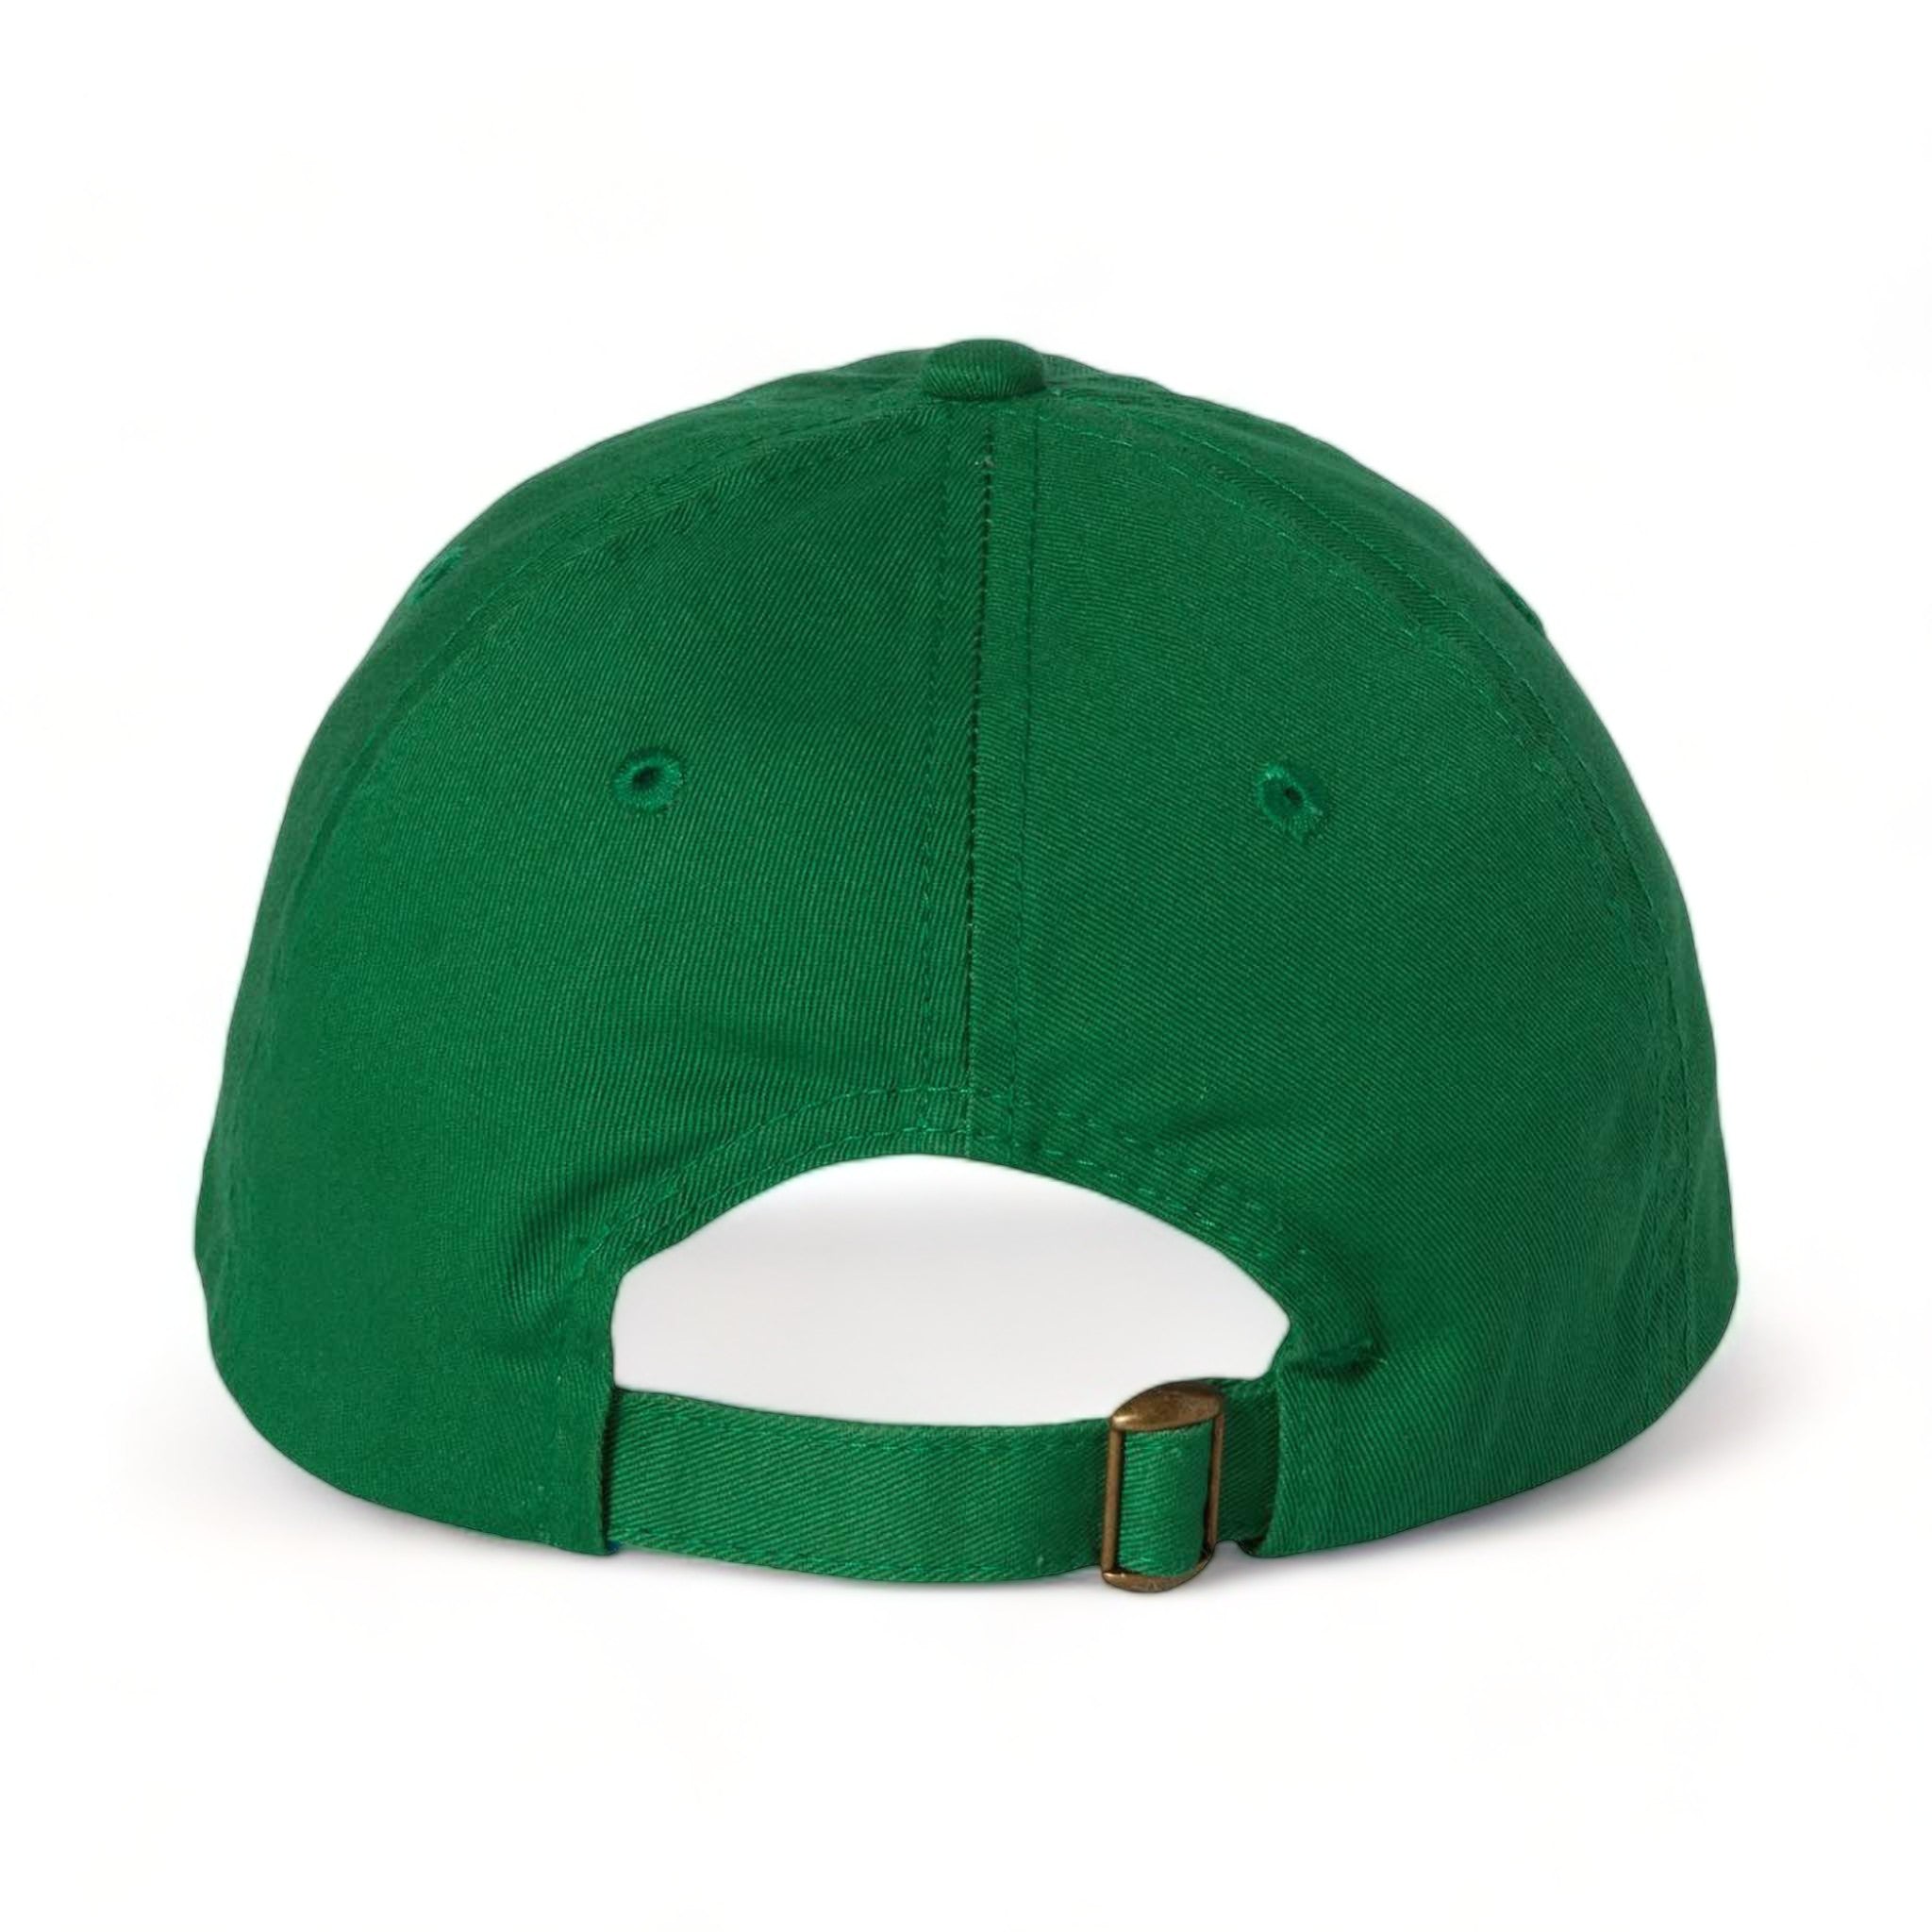 Back view of Valucap VC300A custom hat in kelly